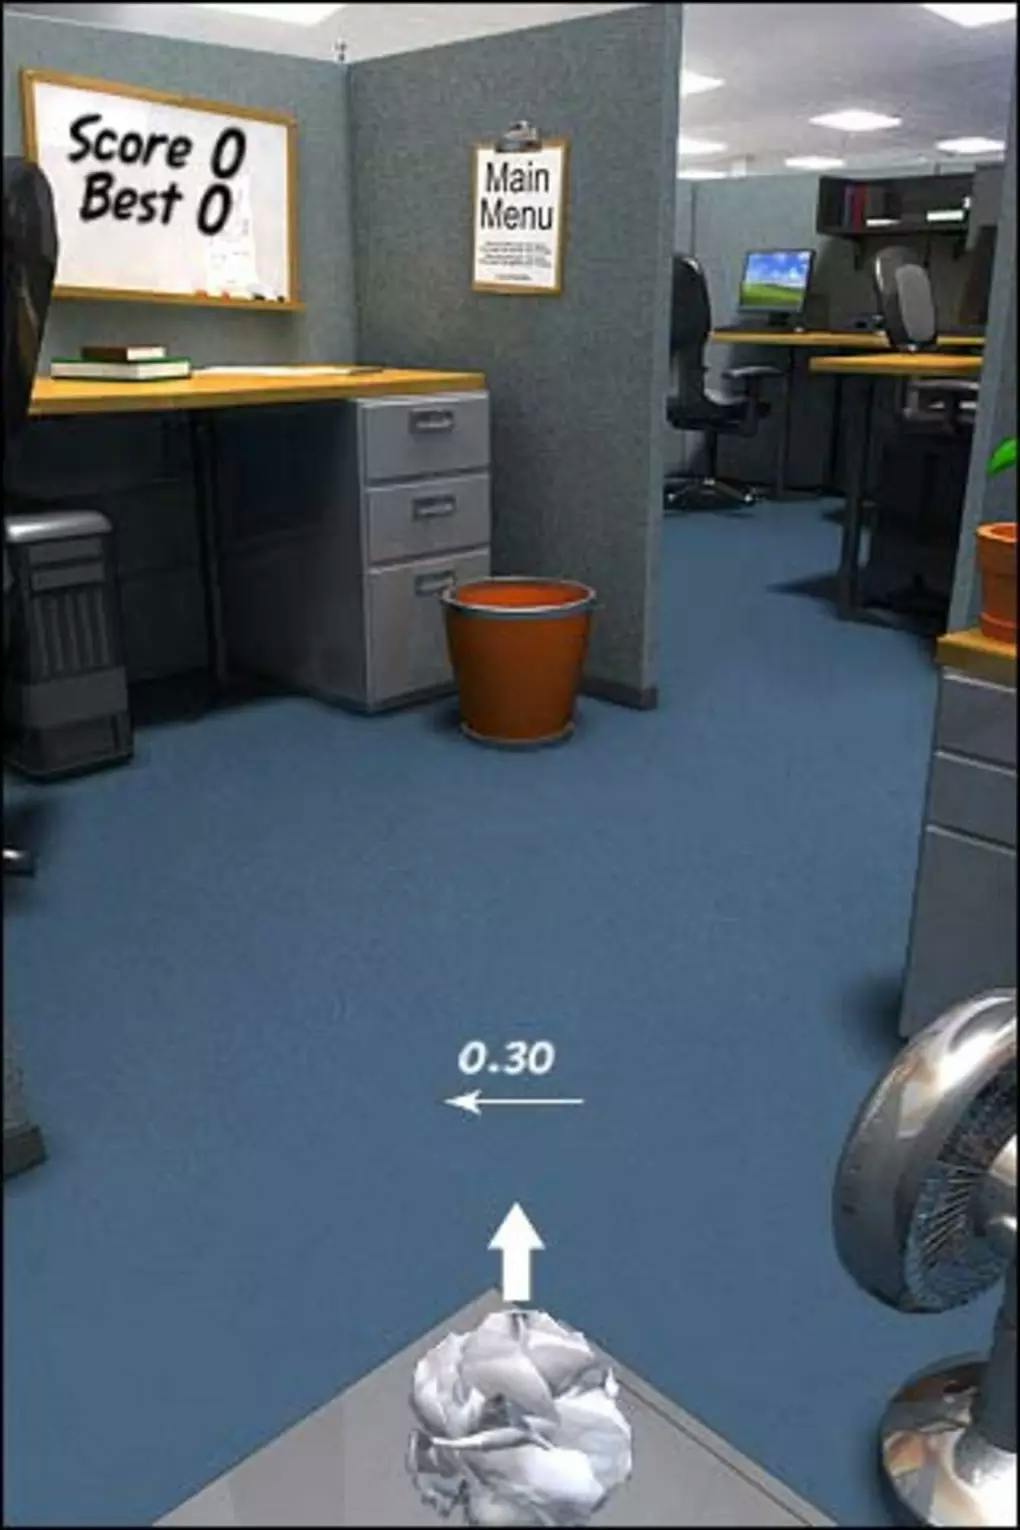 Paper Toss was an early days iOS game where you throw paper balls into a bin (iykyk).